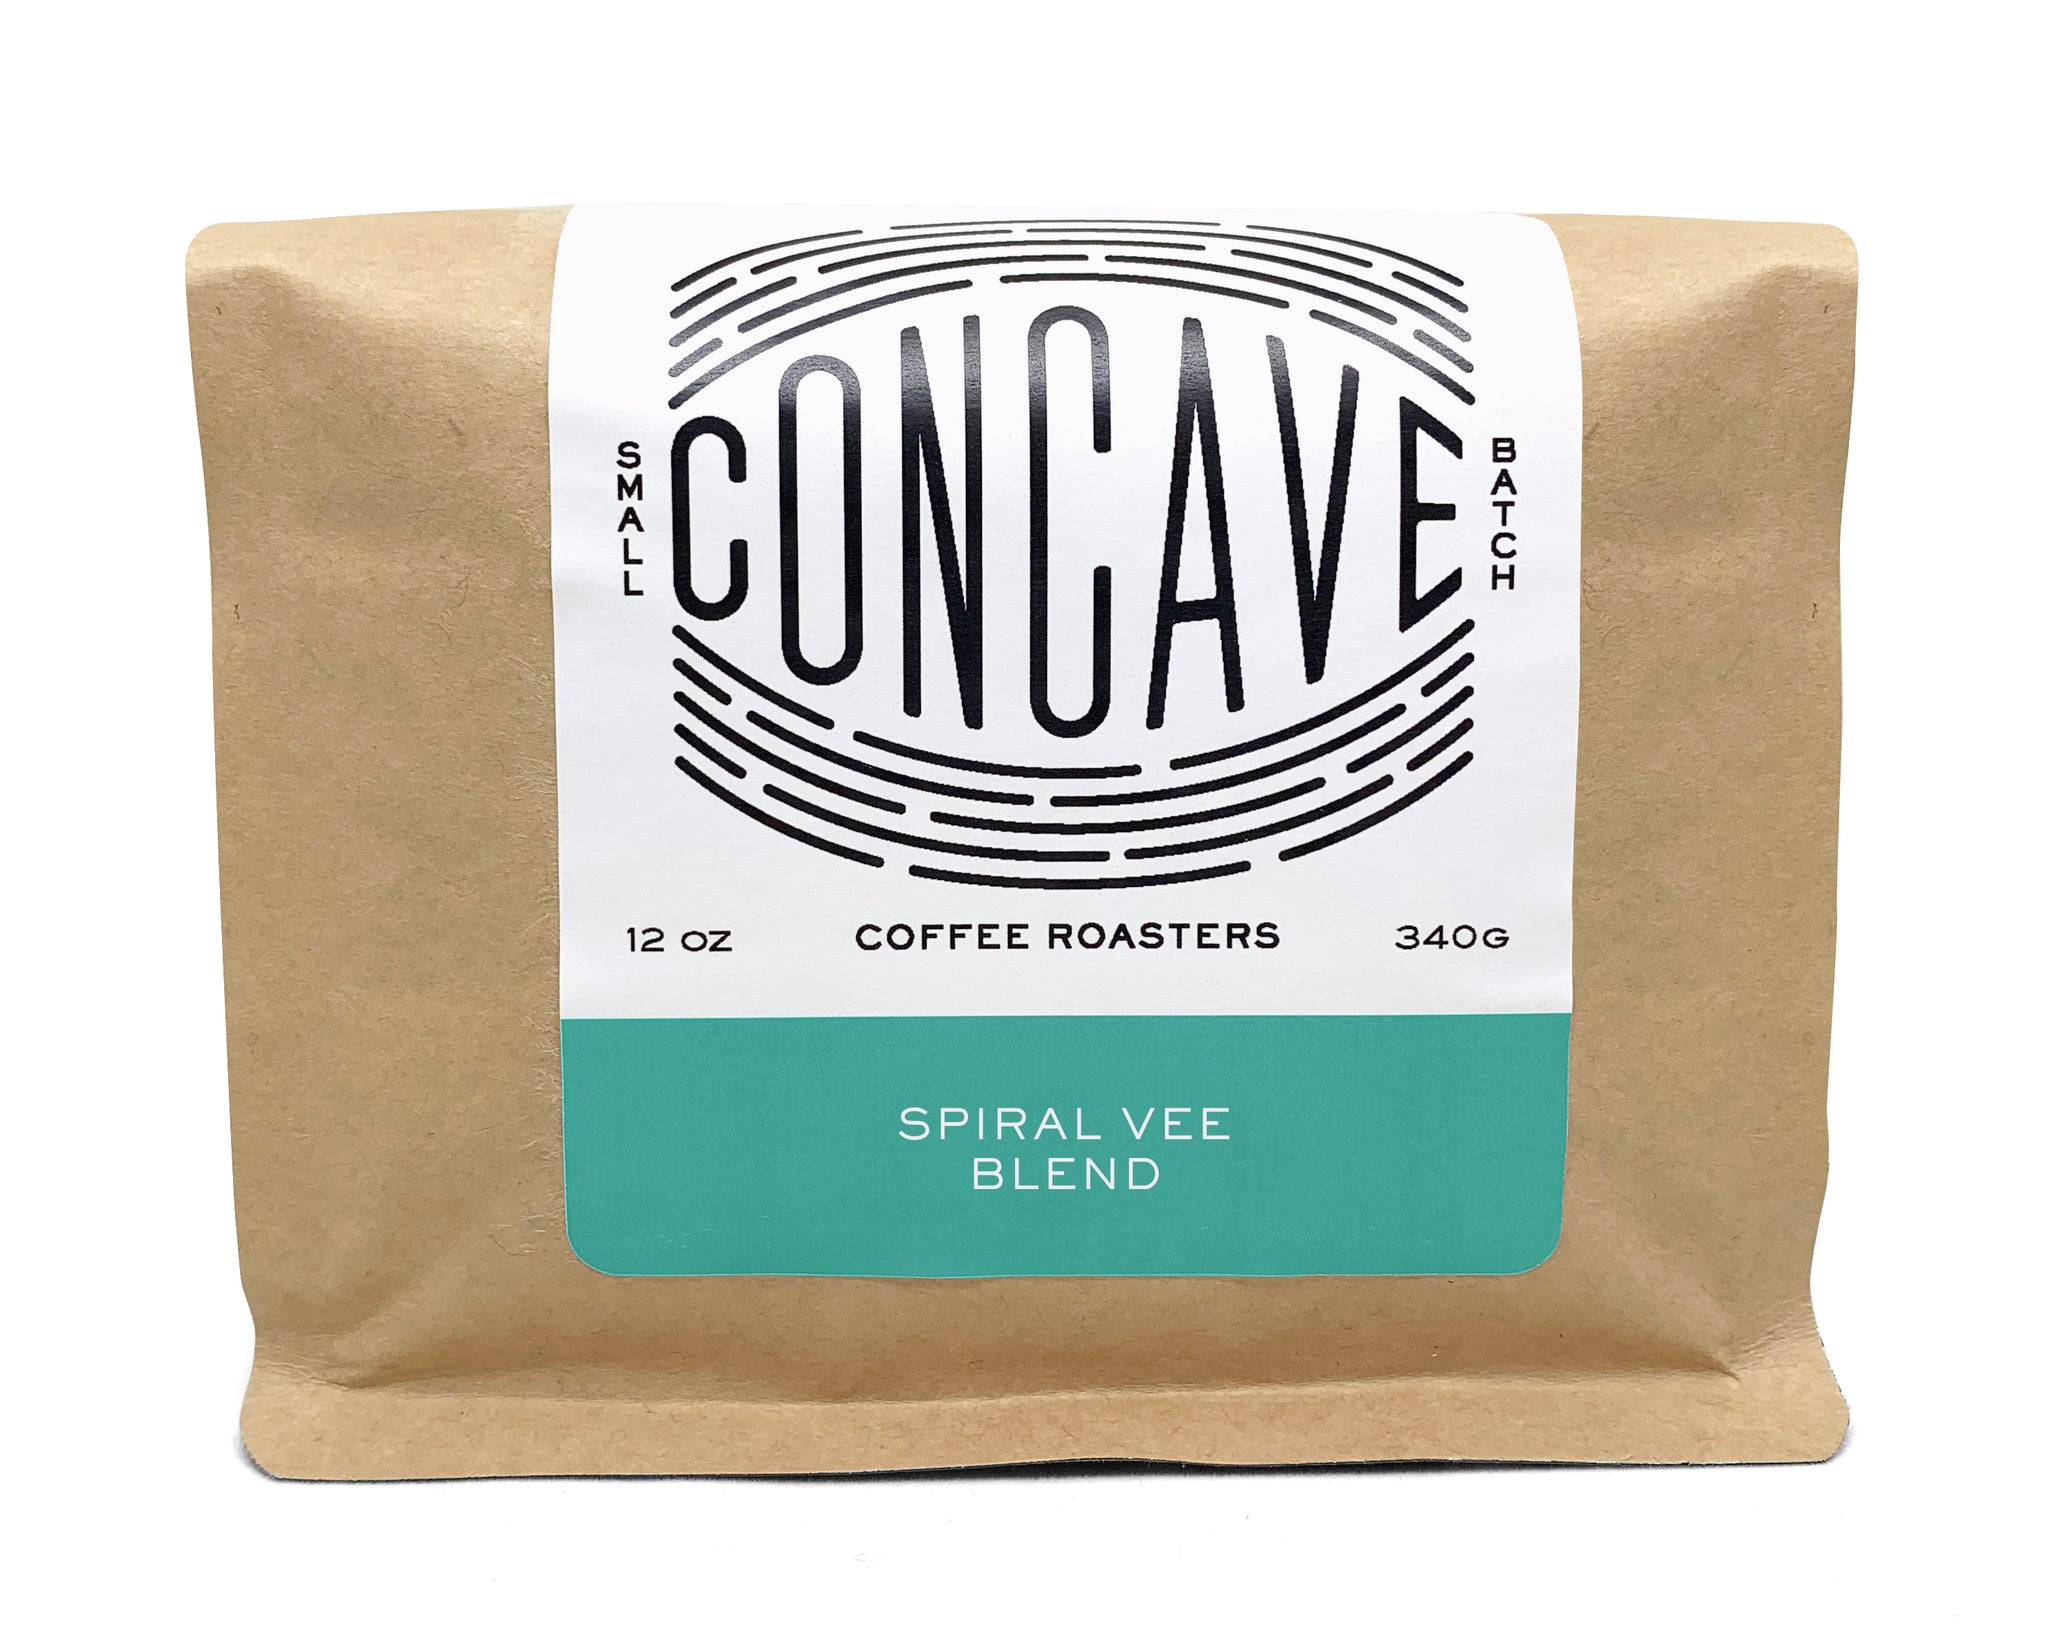 Spiral Vee Blend | Concave Coffee Roasters | Dript Coffee Co.